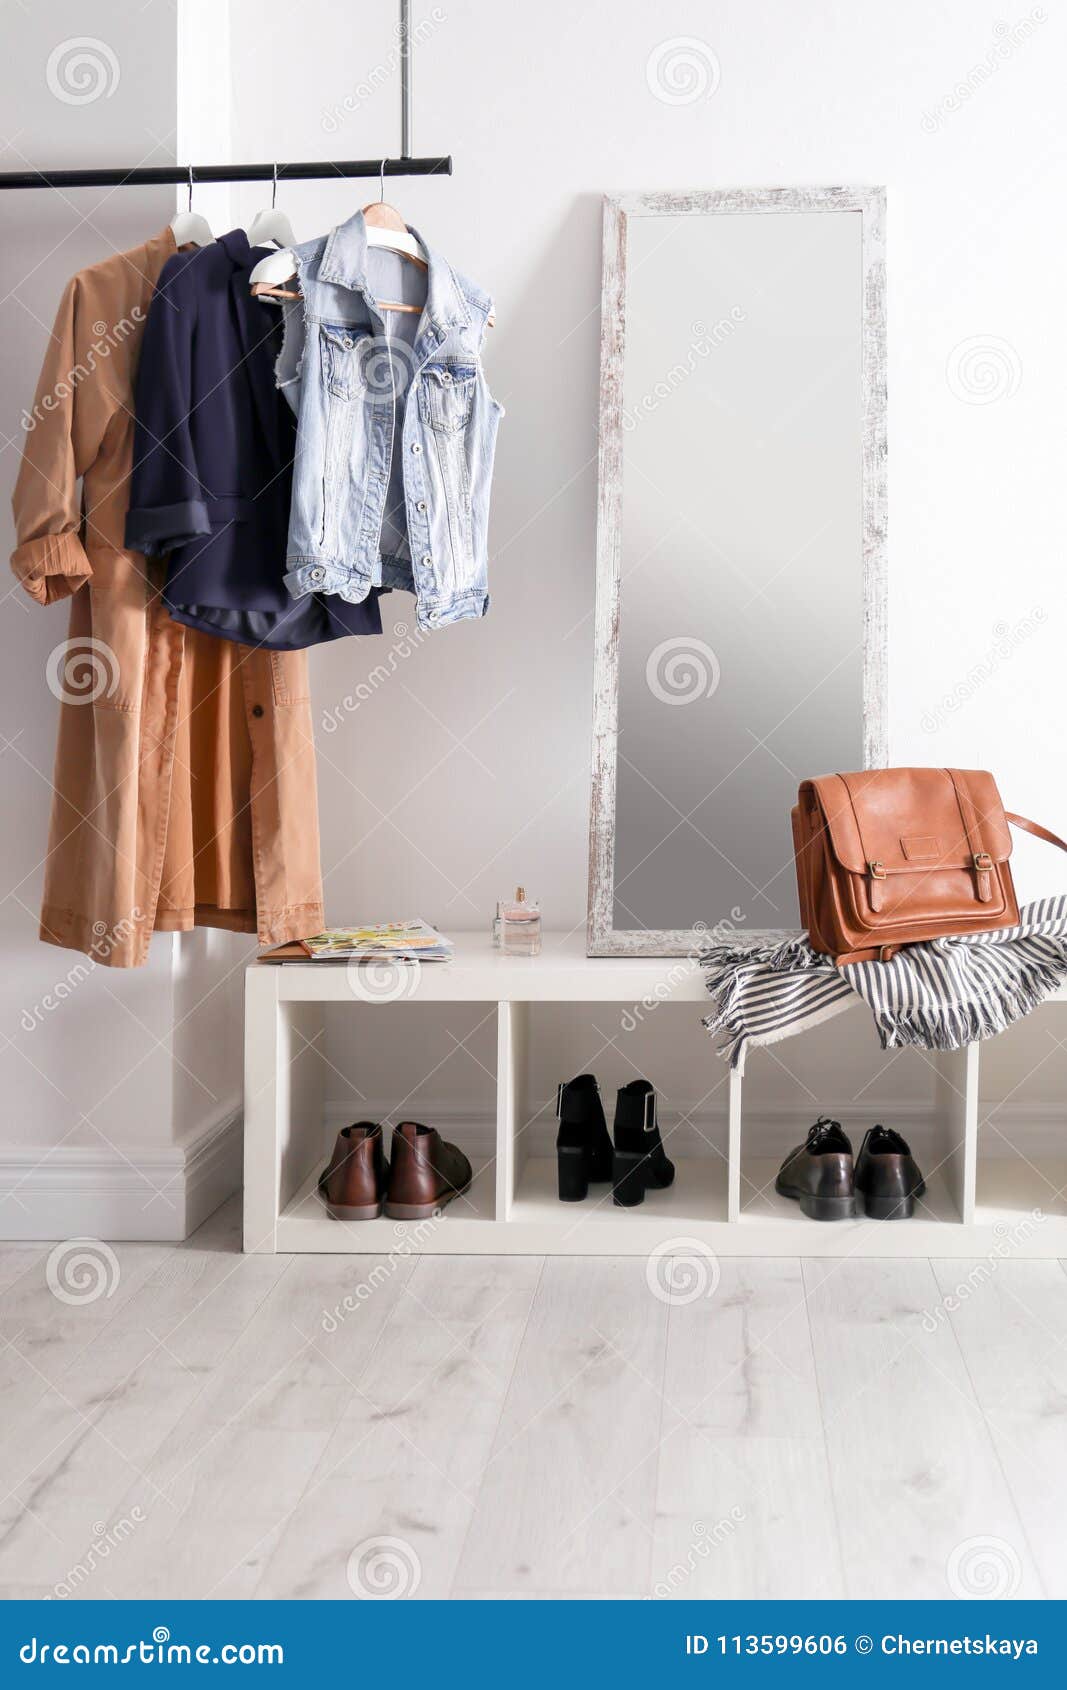 Modern Hallway Interior With Hanging Clothes Stock Photo